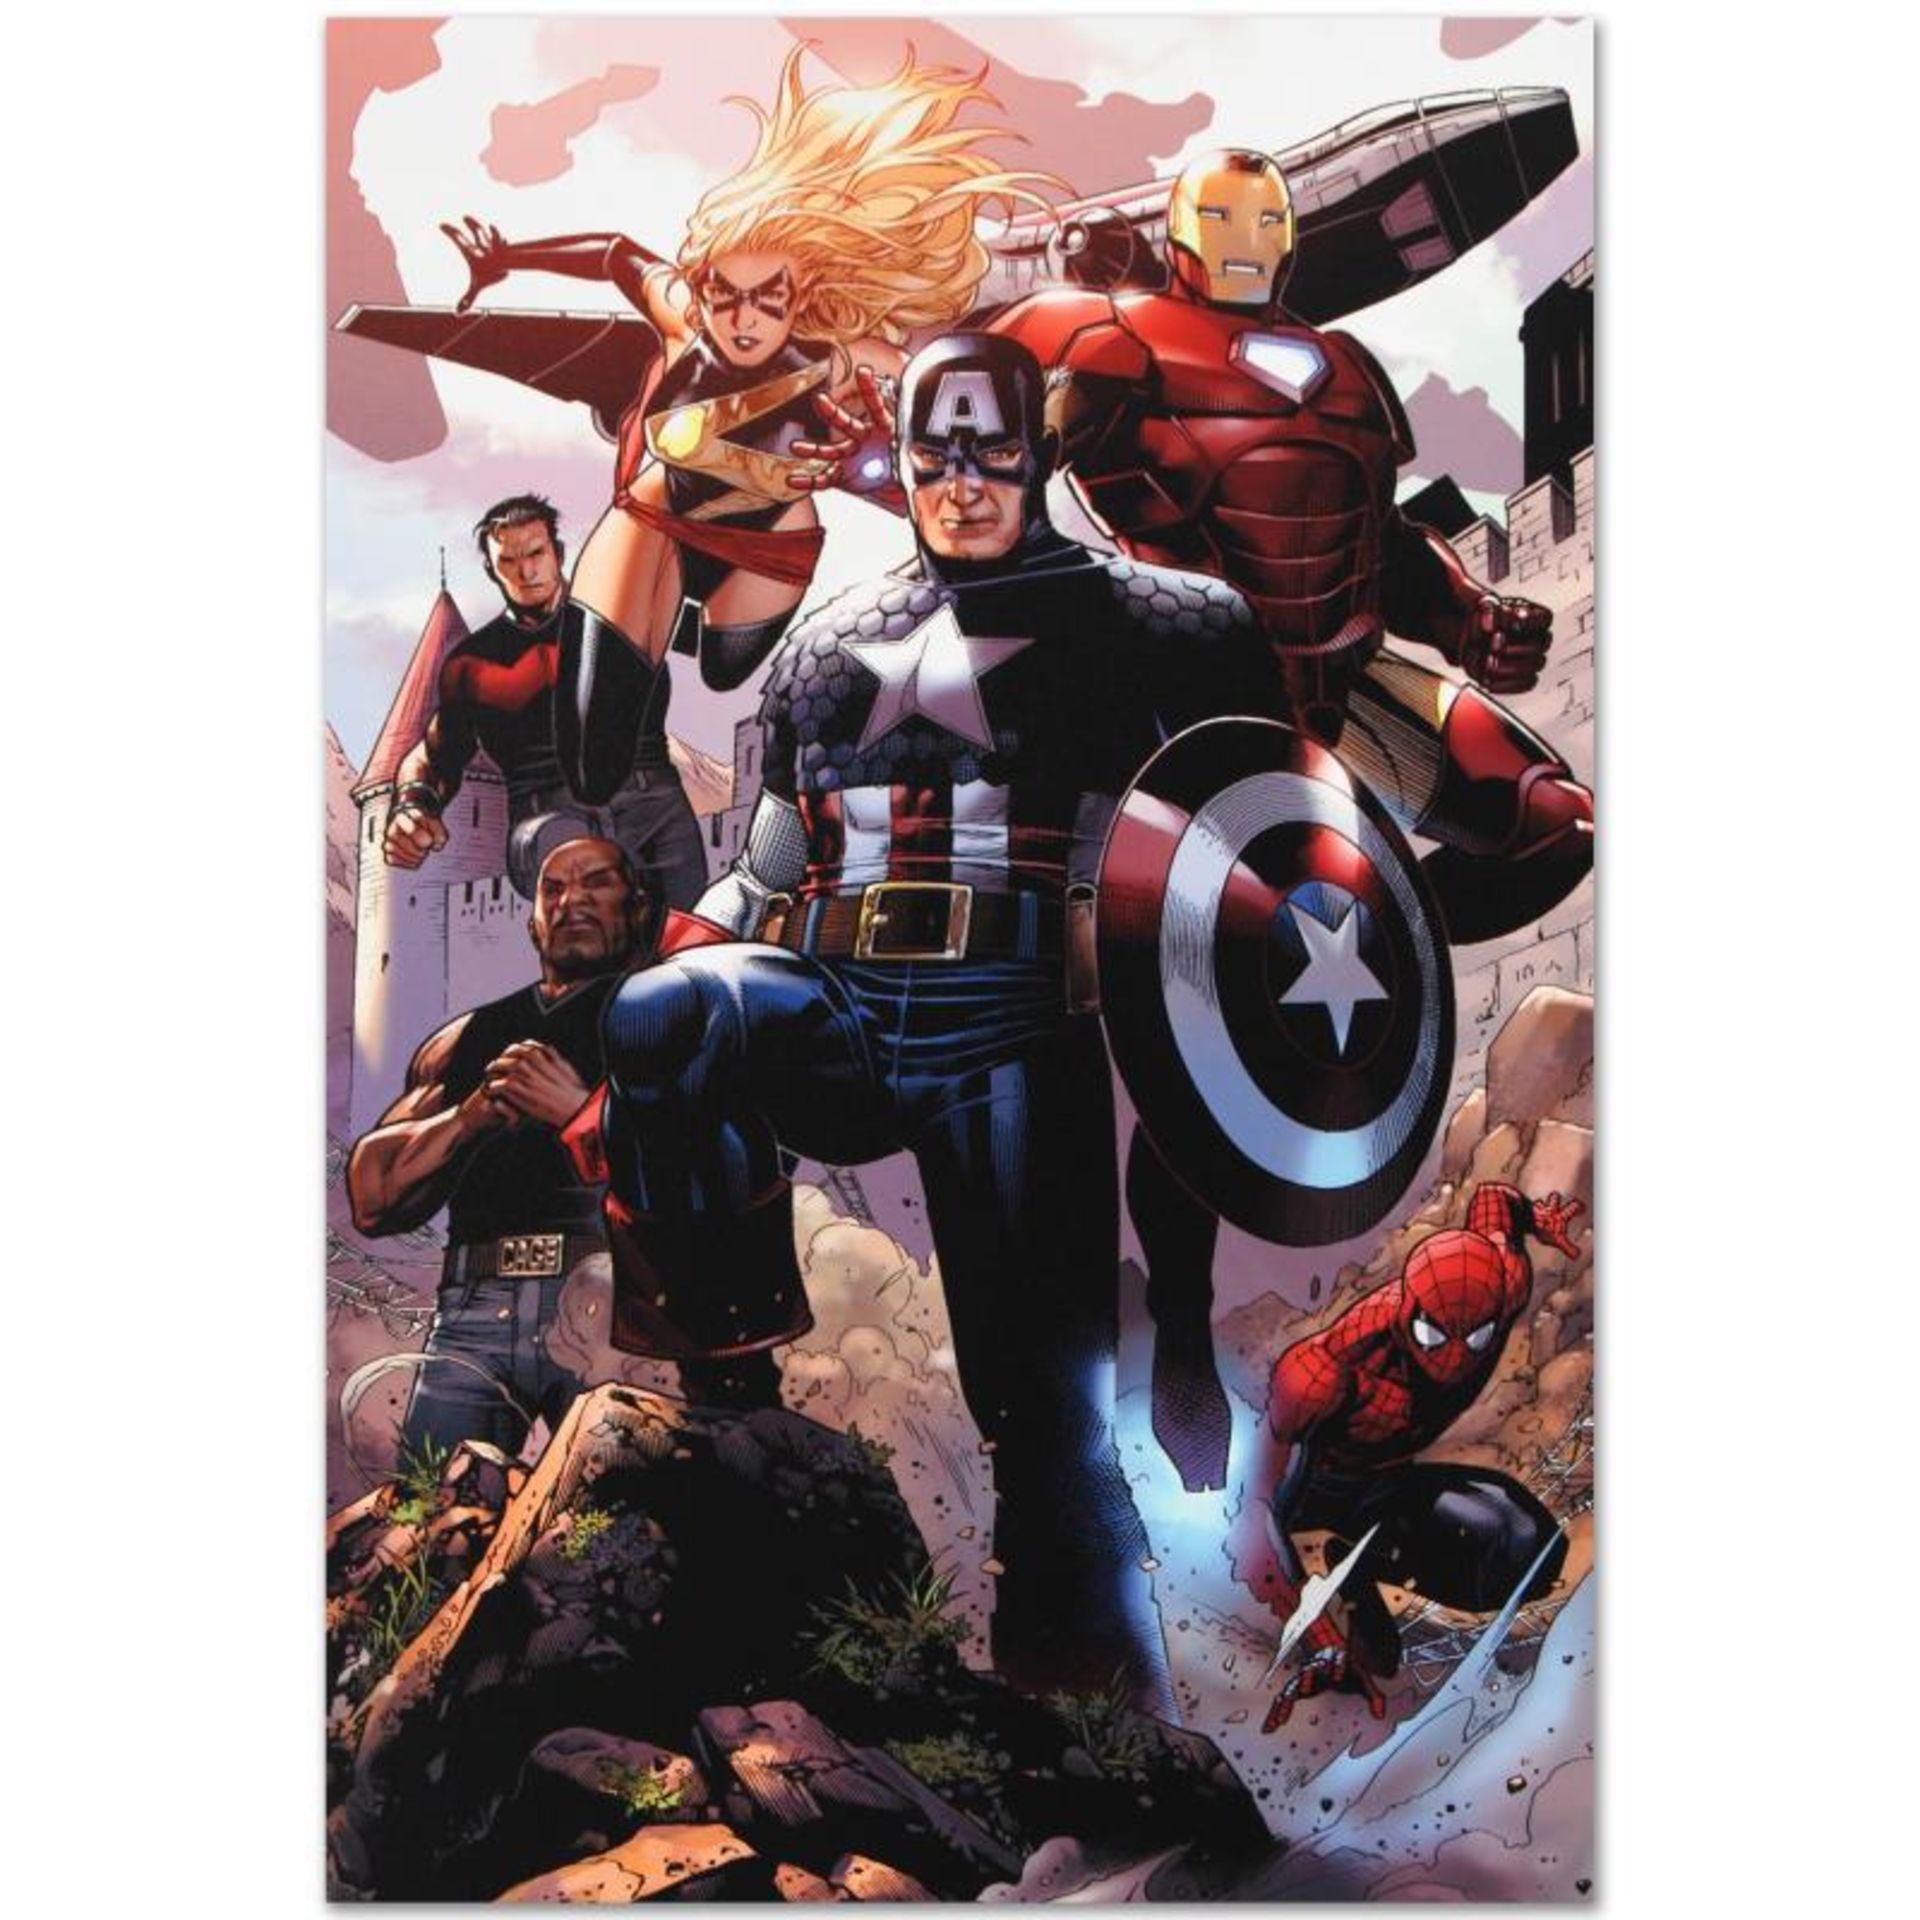 Avengers: The Children's Crusade #4 by Marvel Comics - Image 2 of 2